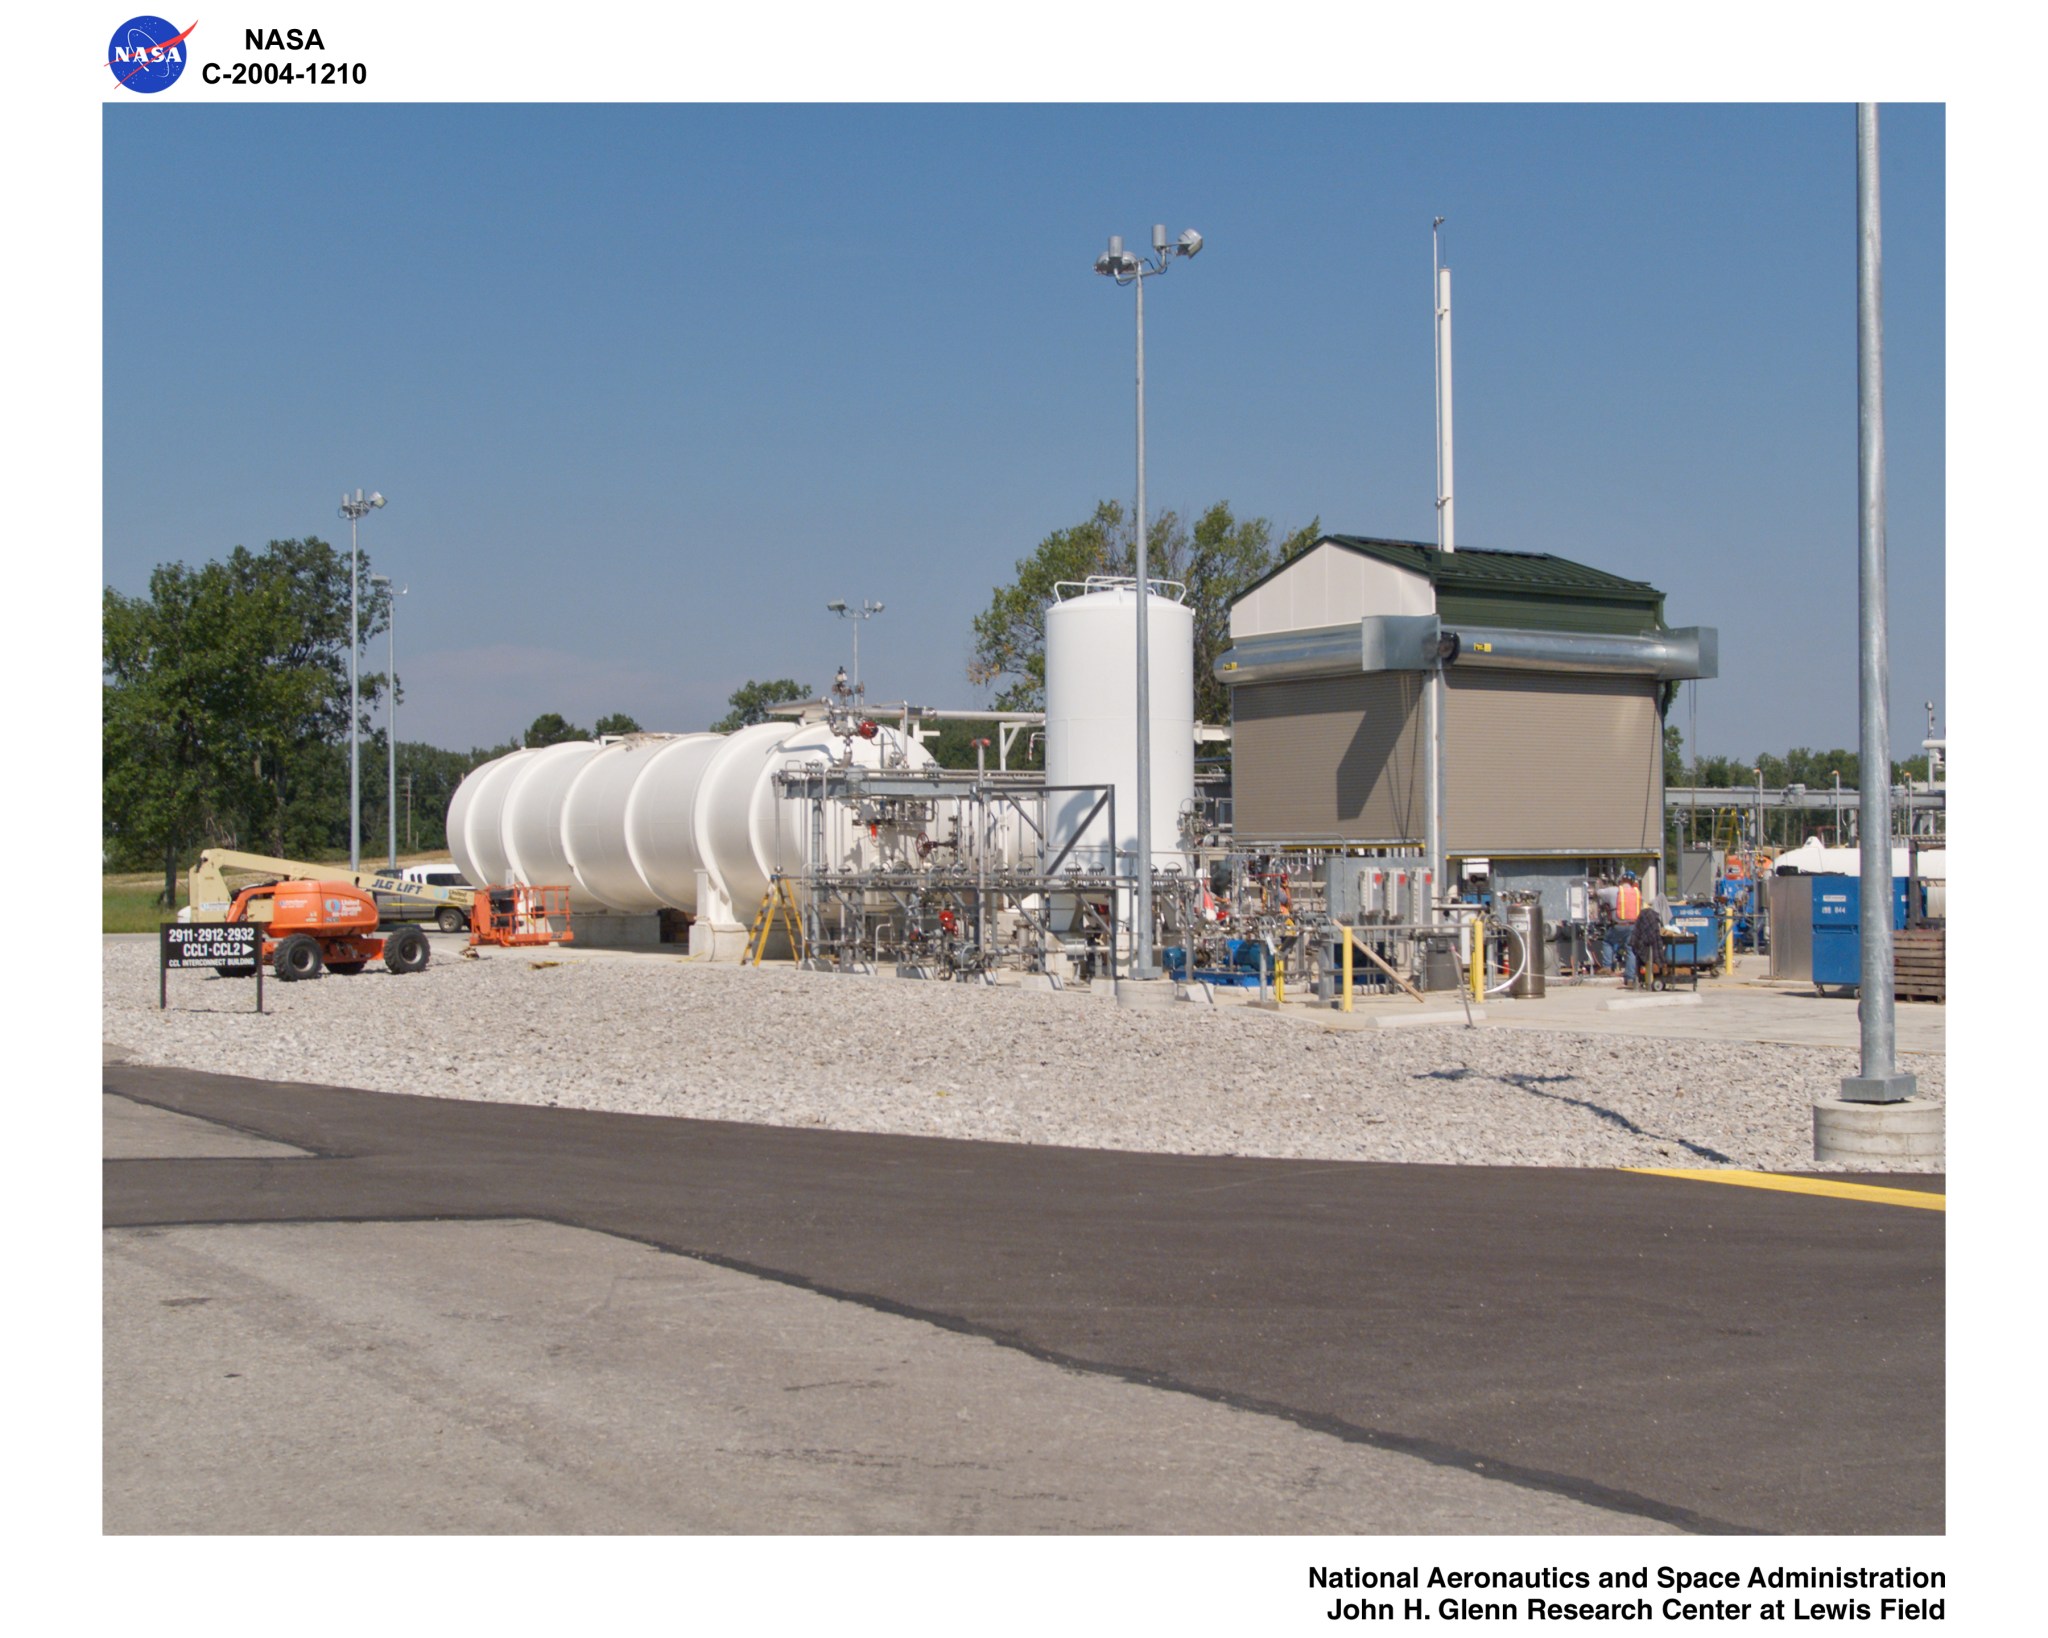 This external view of the facility includes two large white cylinders, one horizonal and one vertical. A small square building next to them, and many components in front for hook up.